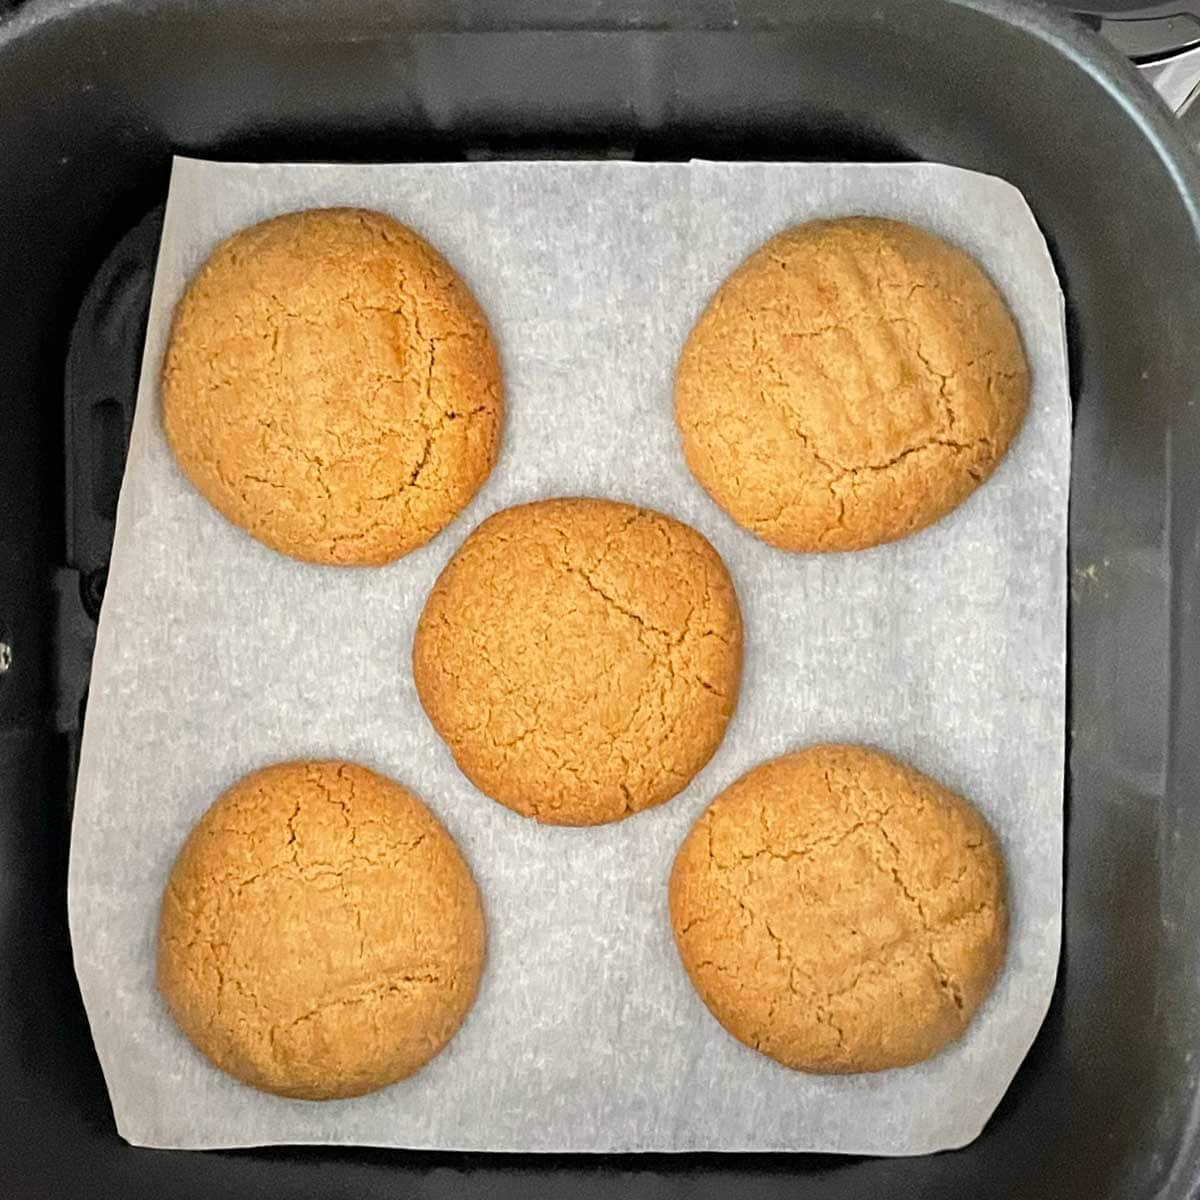 Peanut butter cookie baked in air fryer.